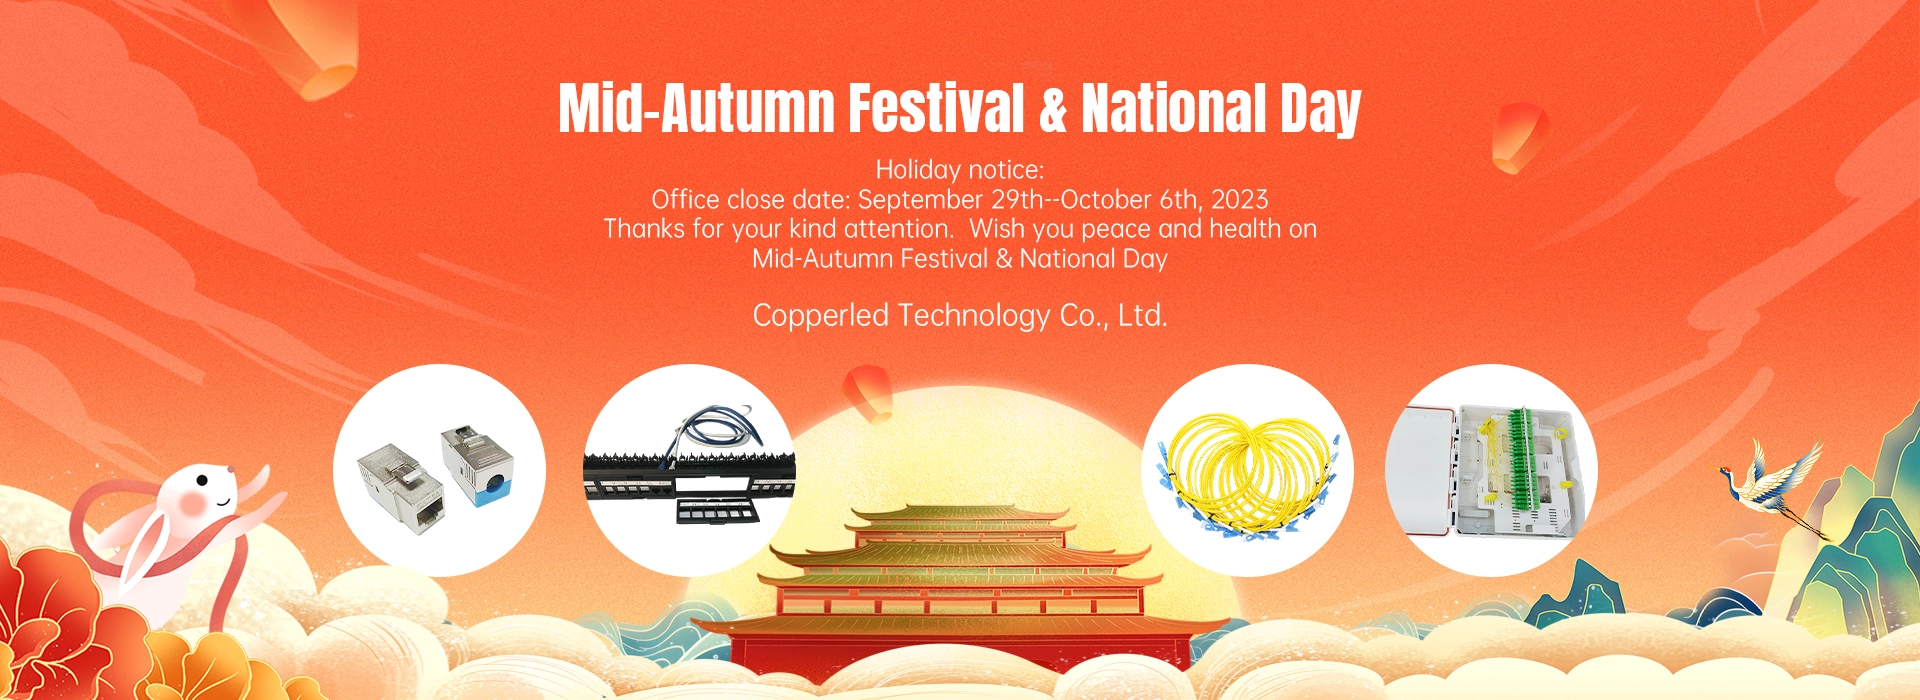 2023 National Day & Mid-Autumn Festival Holiday notice